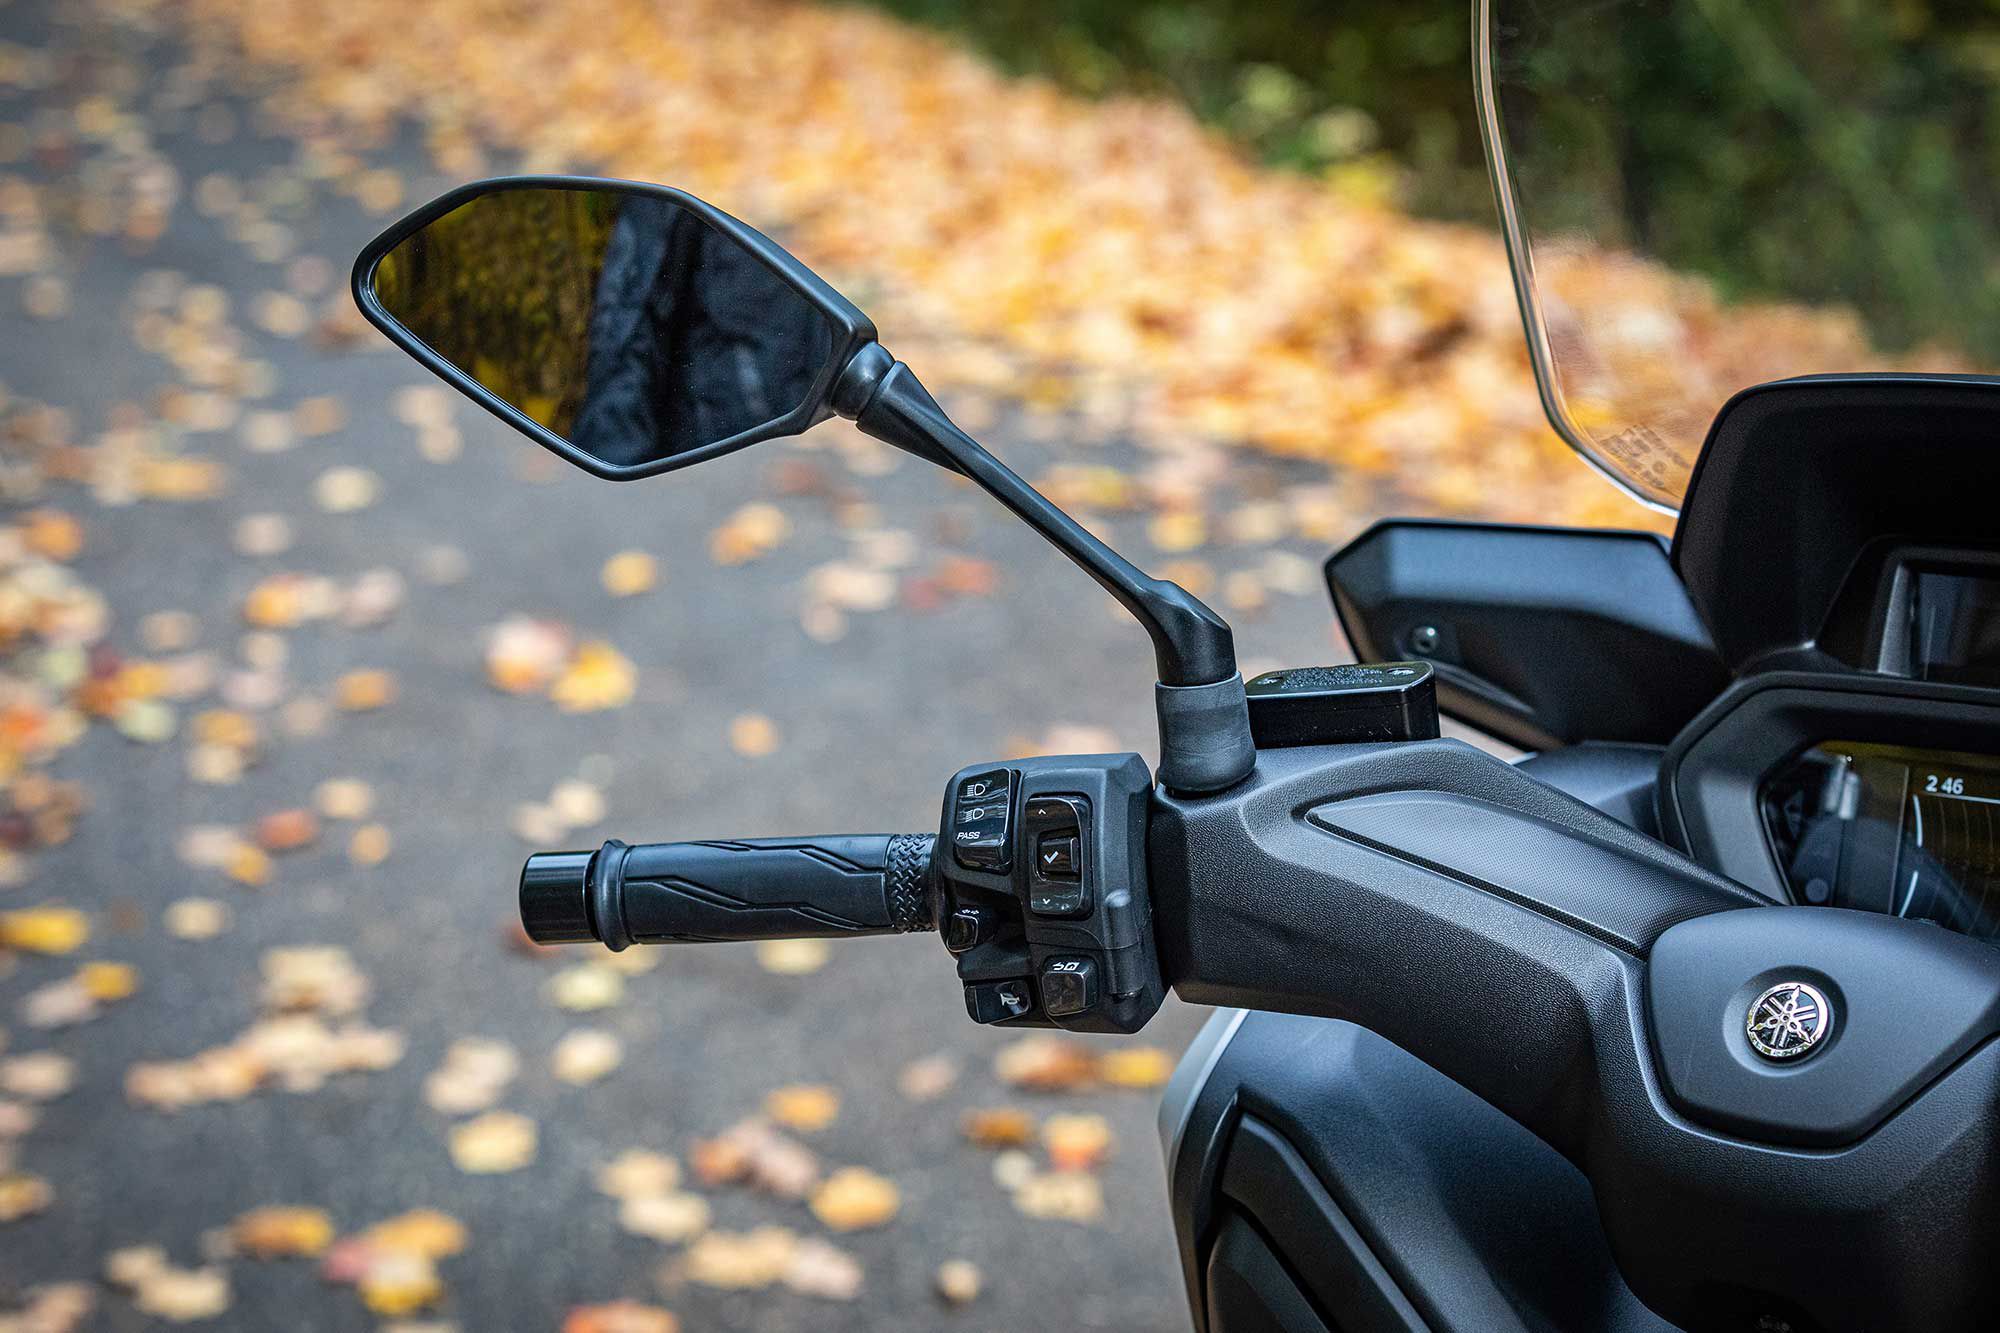 Riders will be able to toggle through the new display system via a handlebar toggle switch.